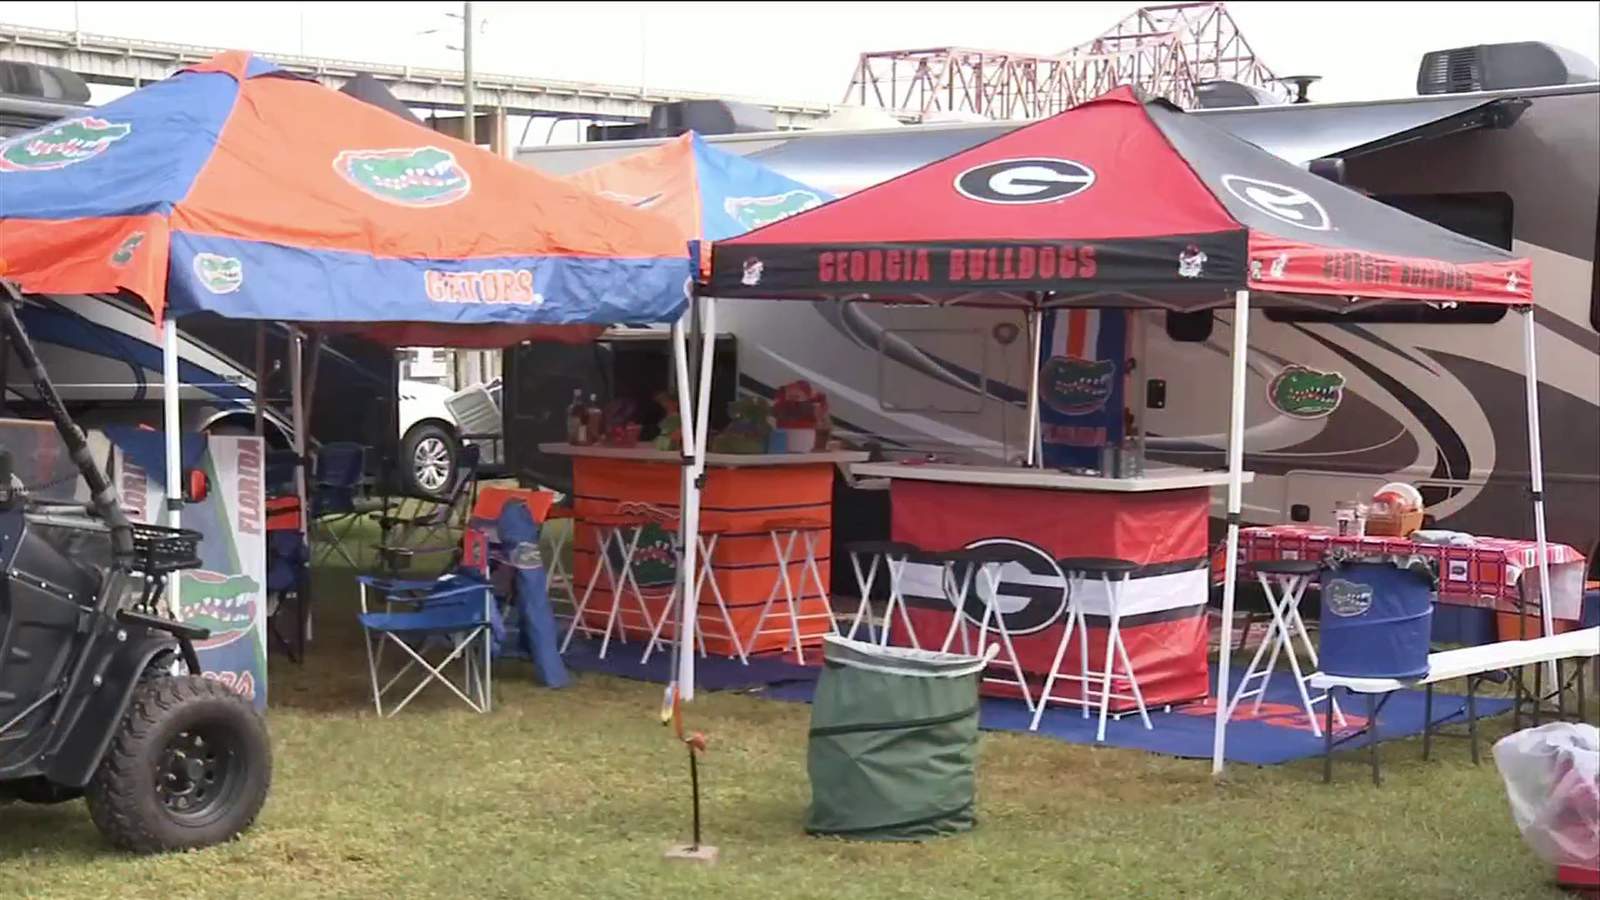 Fans, businesses gearing up for scaled back Georgia-Florida festivities